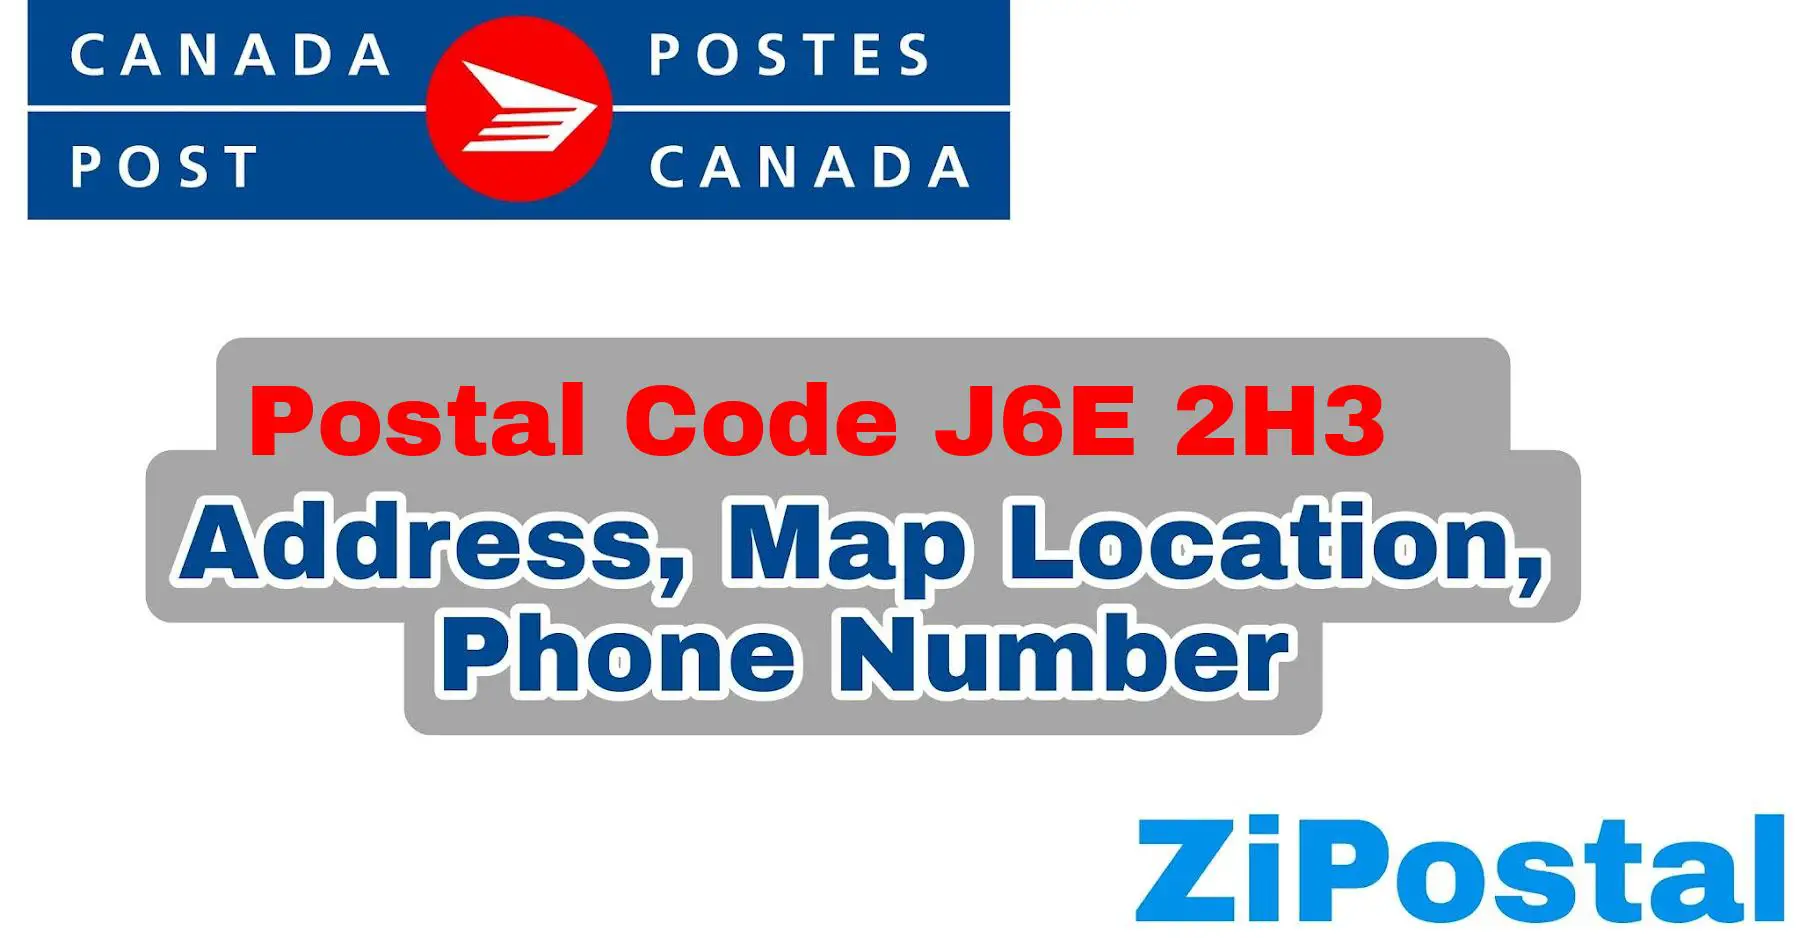 Postal Code J6E 2H3 Address Map Location and Phone Number